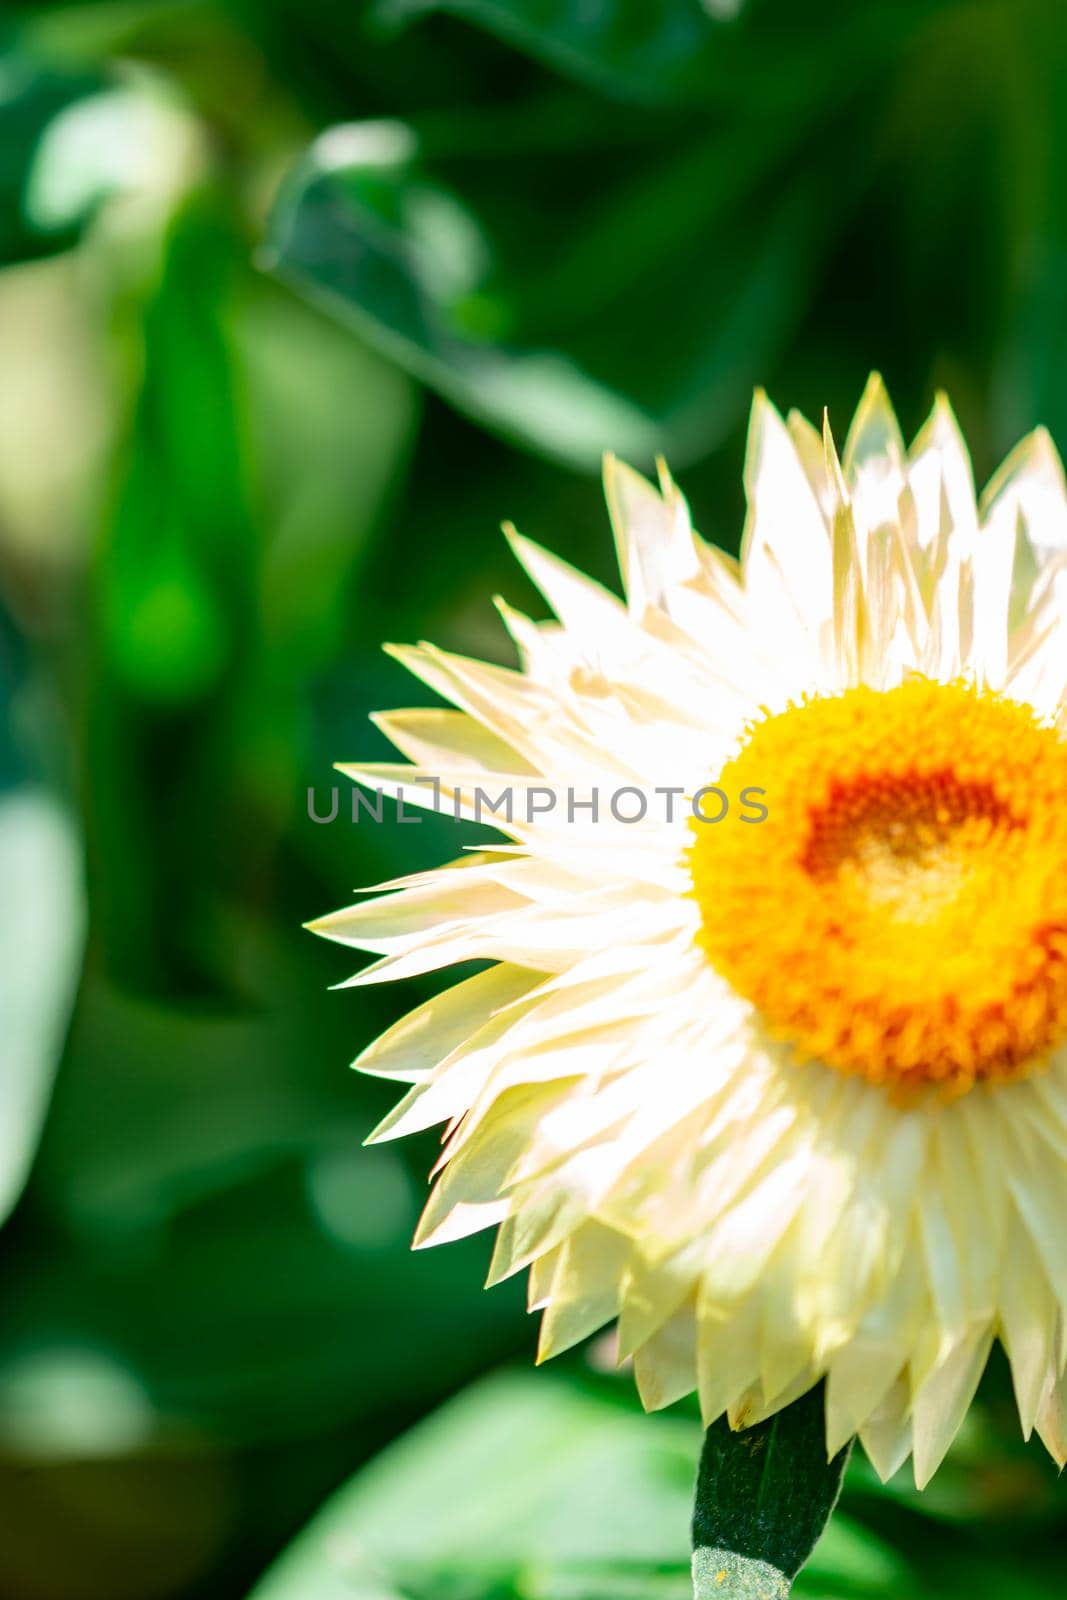 Vertical closeup shot of a yellow flower cut in half with a soft blurry background image with some room for text